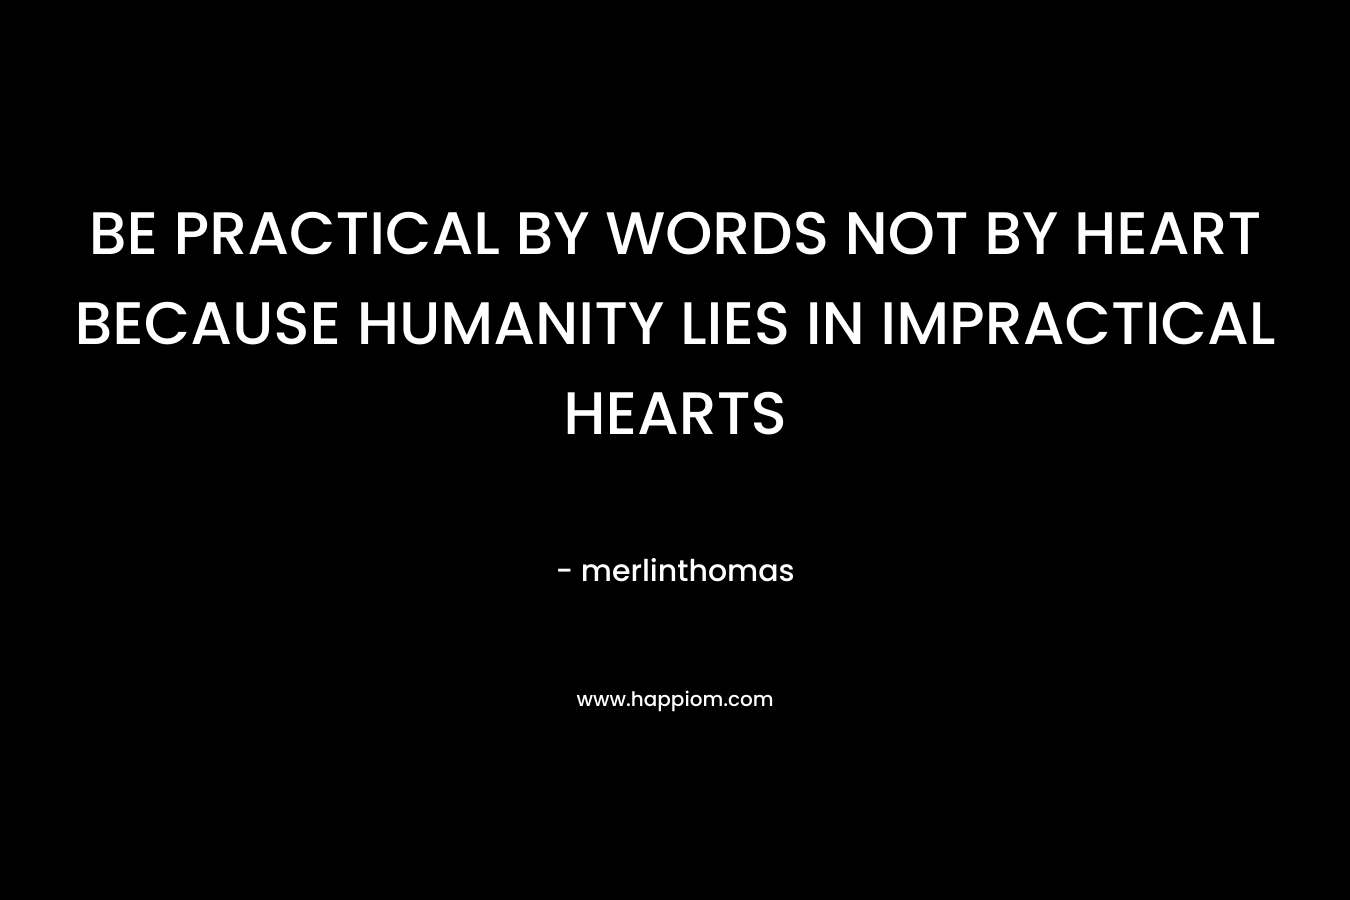 BE PRACTICAL BY WORDS NOT BY HEART BECAUSE HUMANITY LIES IN IMPRACTICAL HEARTS